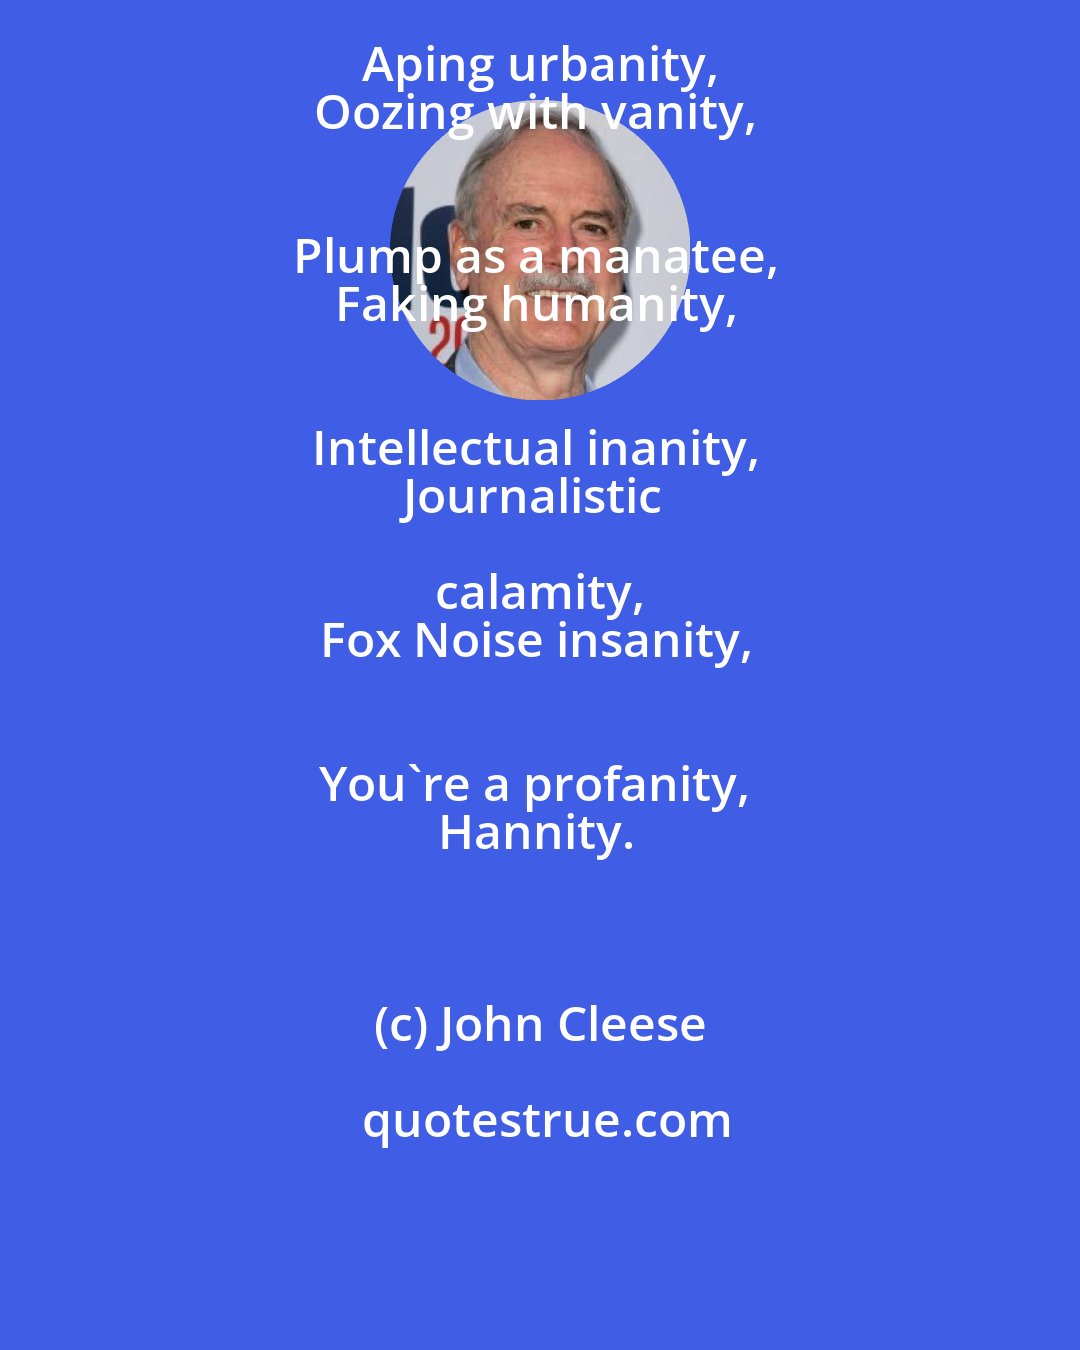 John Cleese: Aping urbanity, 
Oozing with vanity, 
Plump as a manatee, 
Faking humanity, 
Intellectual inanity, 
Journalistic calamity, 
Fox Noise insanity, 
You're a profanity, 
Hannity.